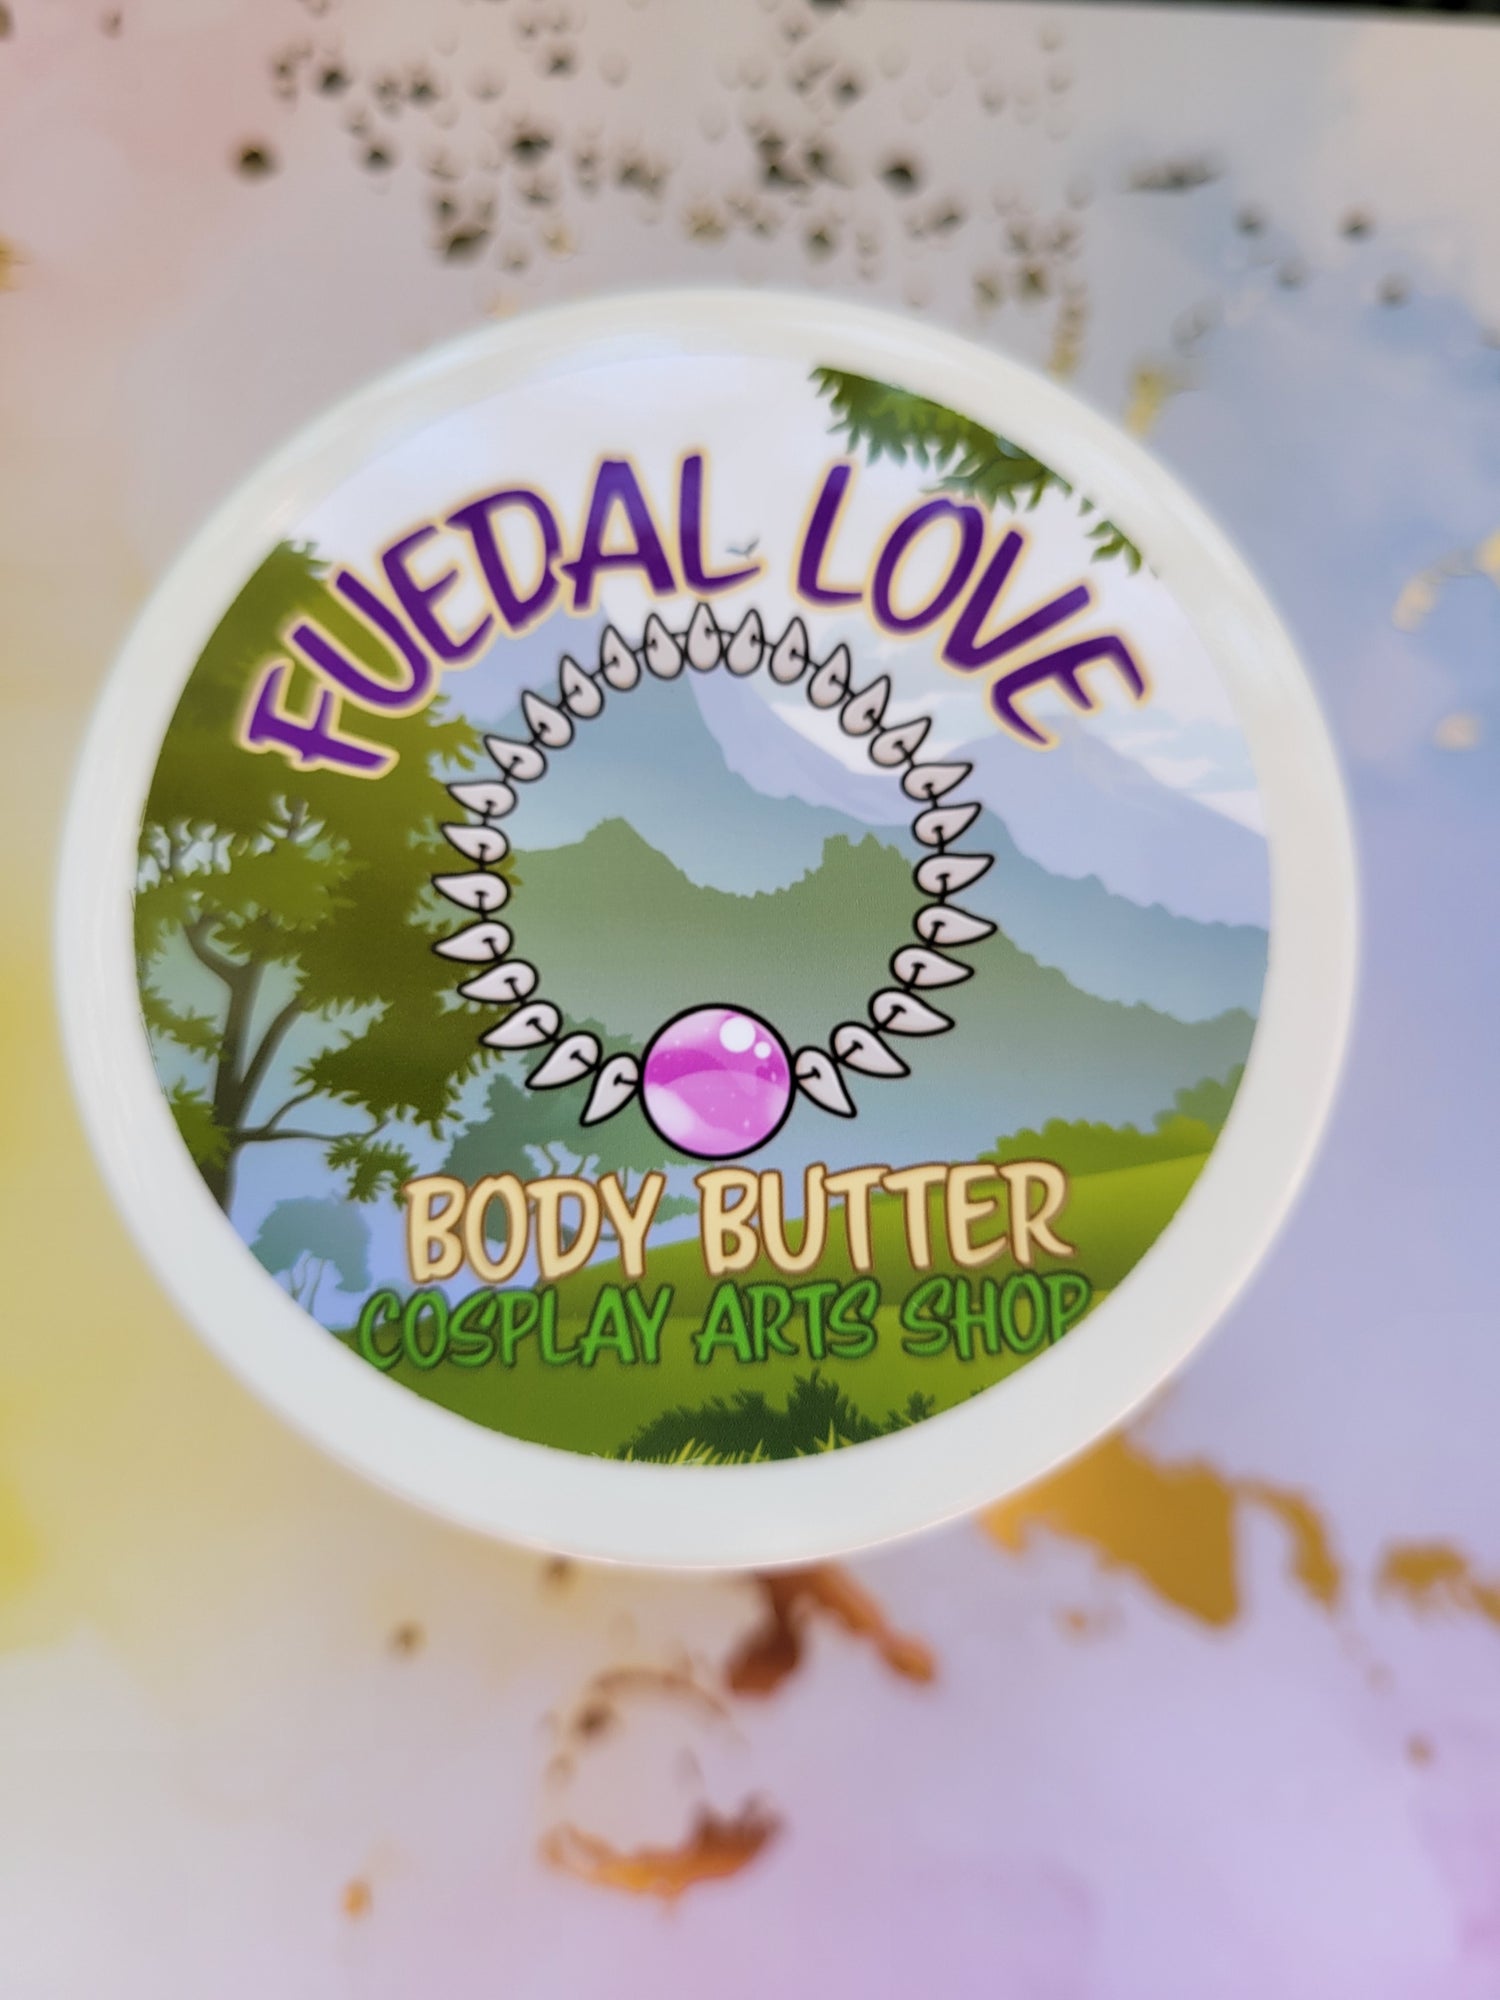 Fuedal Love Body Butter - Cosplay Arts Shop